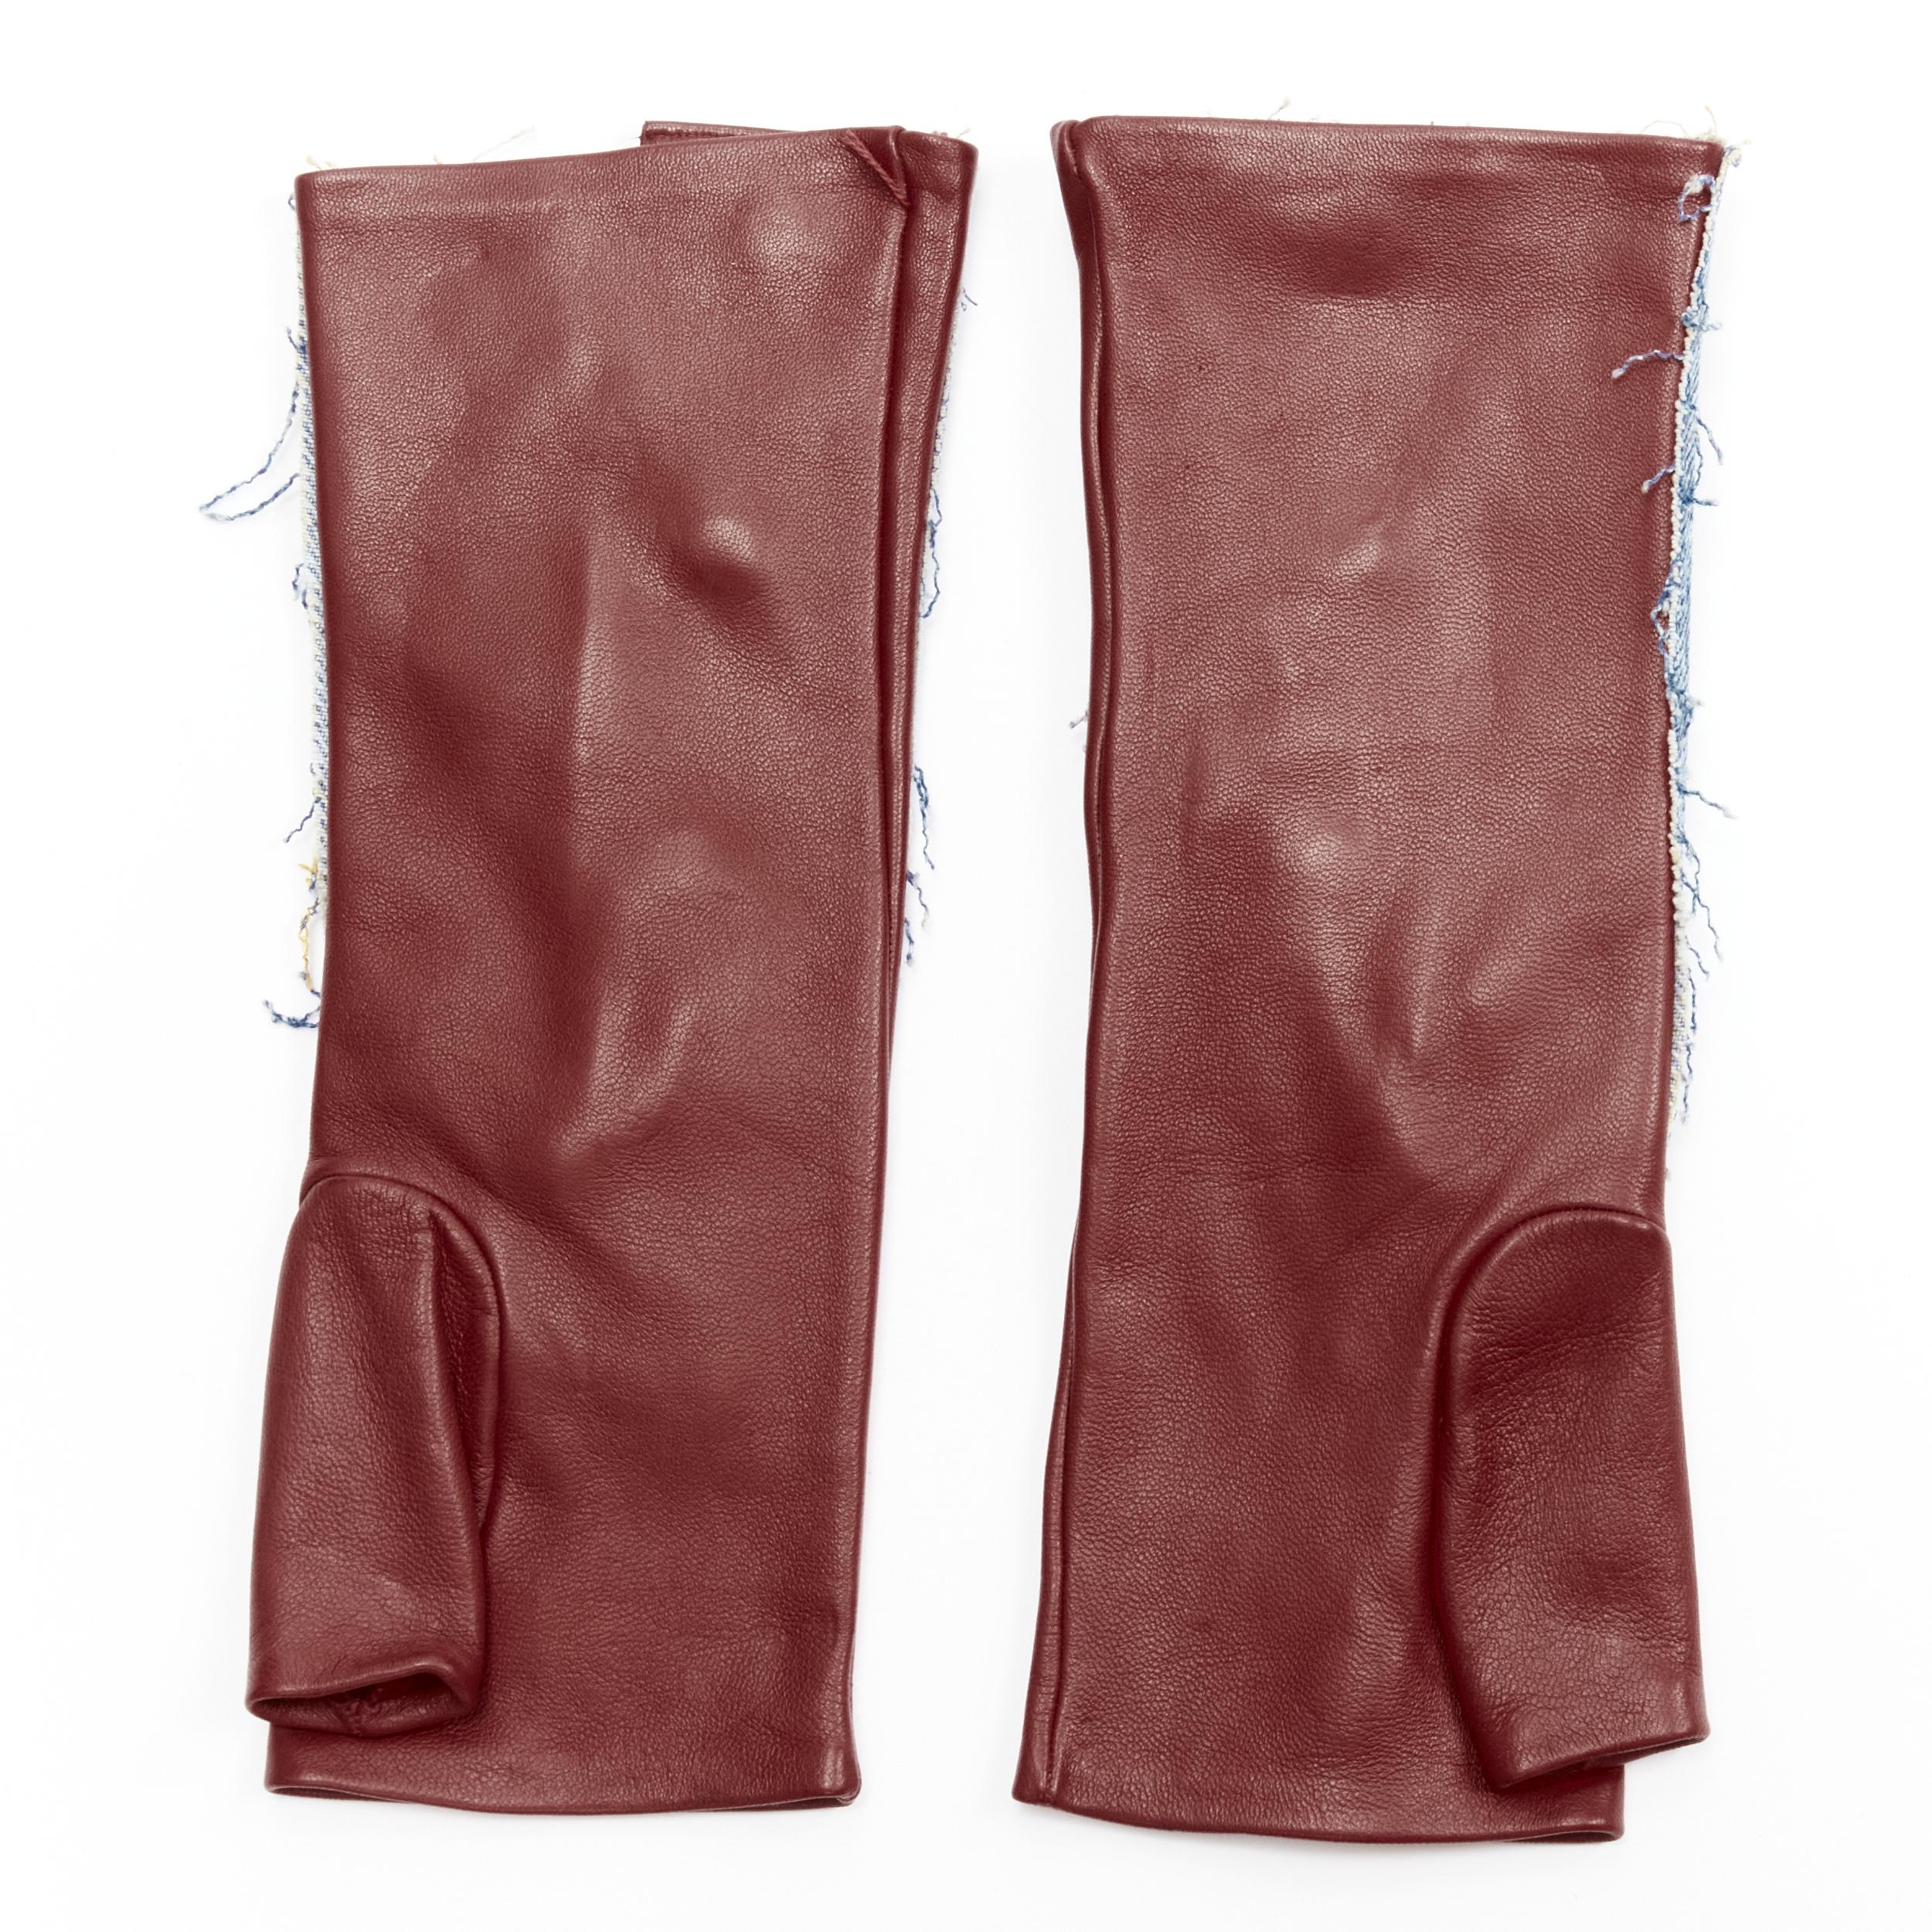 JOHN GALLIANO Vintage red calfskin leather denim fingerless floves
Brand: John Galliano
Designer: John Galliano
Material: Calfskin Leather
Color: Burgundy
Pattern: Solid
Closure: Button
Extra Detail: Antique gold tone curve J buttons.
Made in: